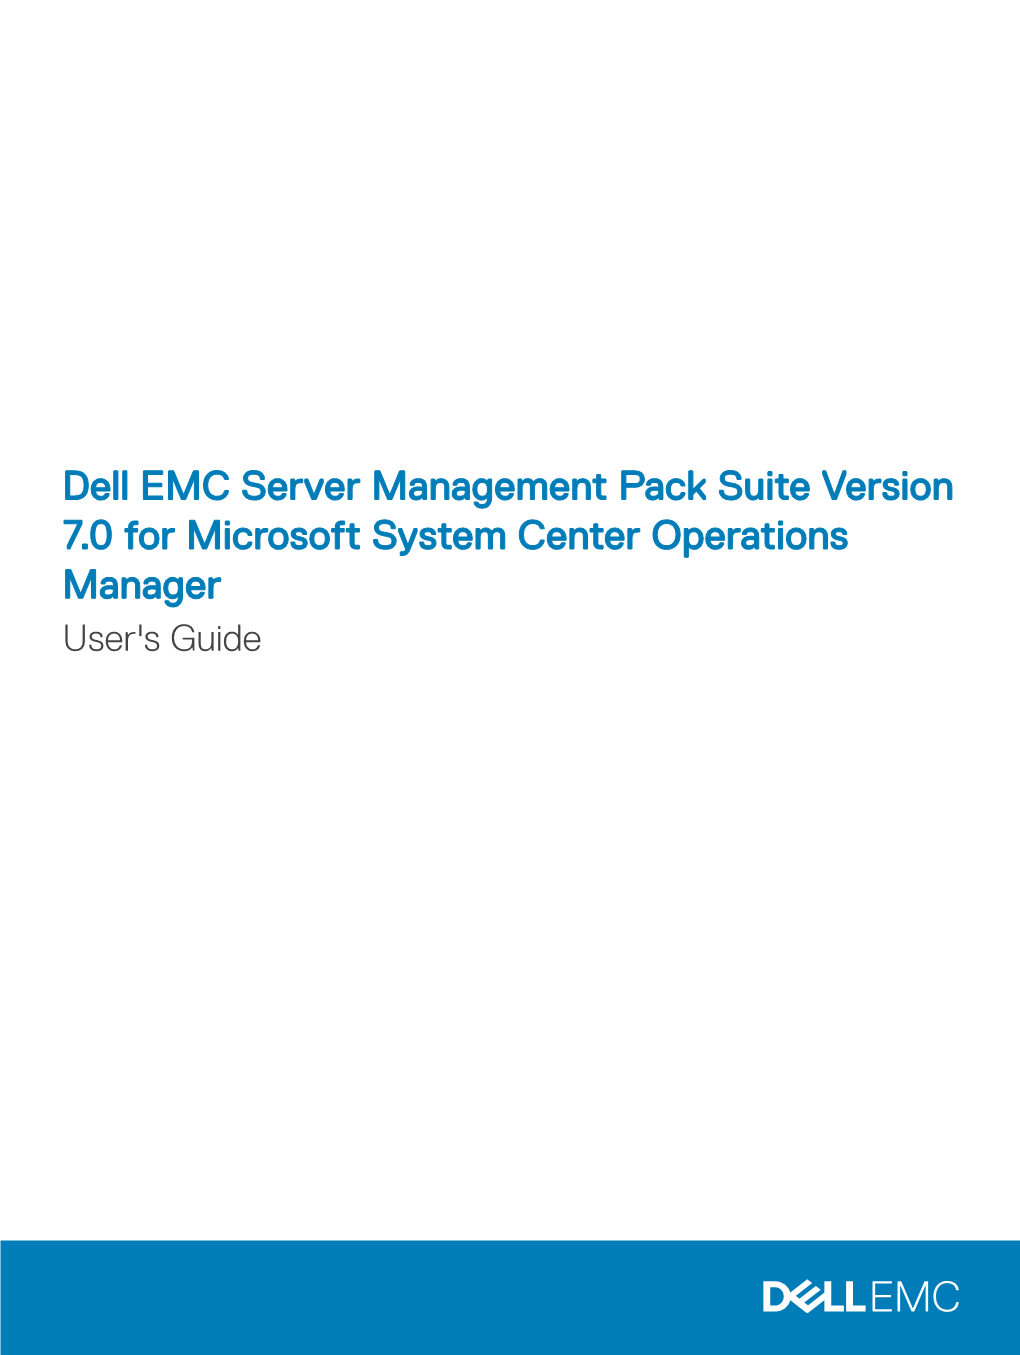 Dell EMC Server Management Pack Suite Version 7.0 for Microsoft System Center Operations Manager User's Guide Notes, Cautions, and Warnings